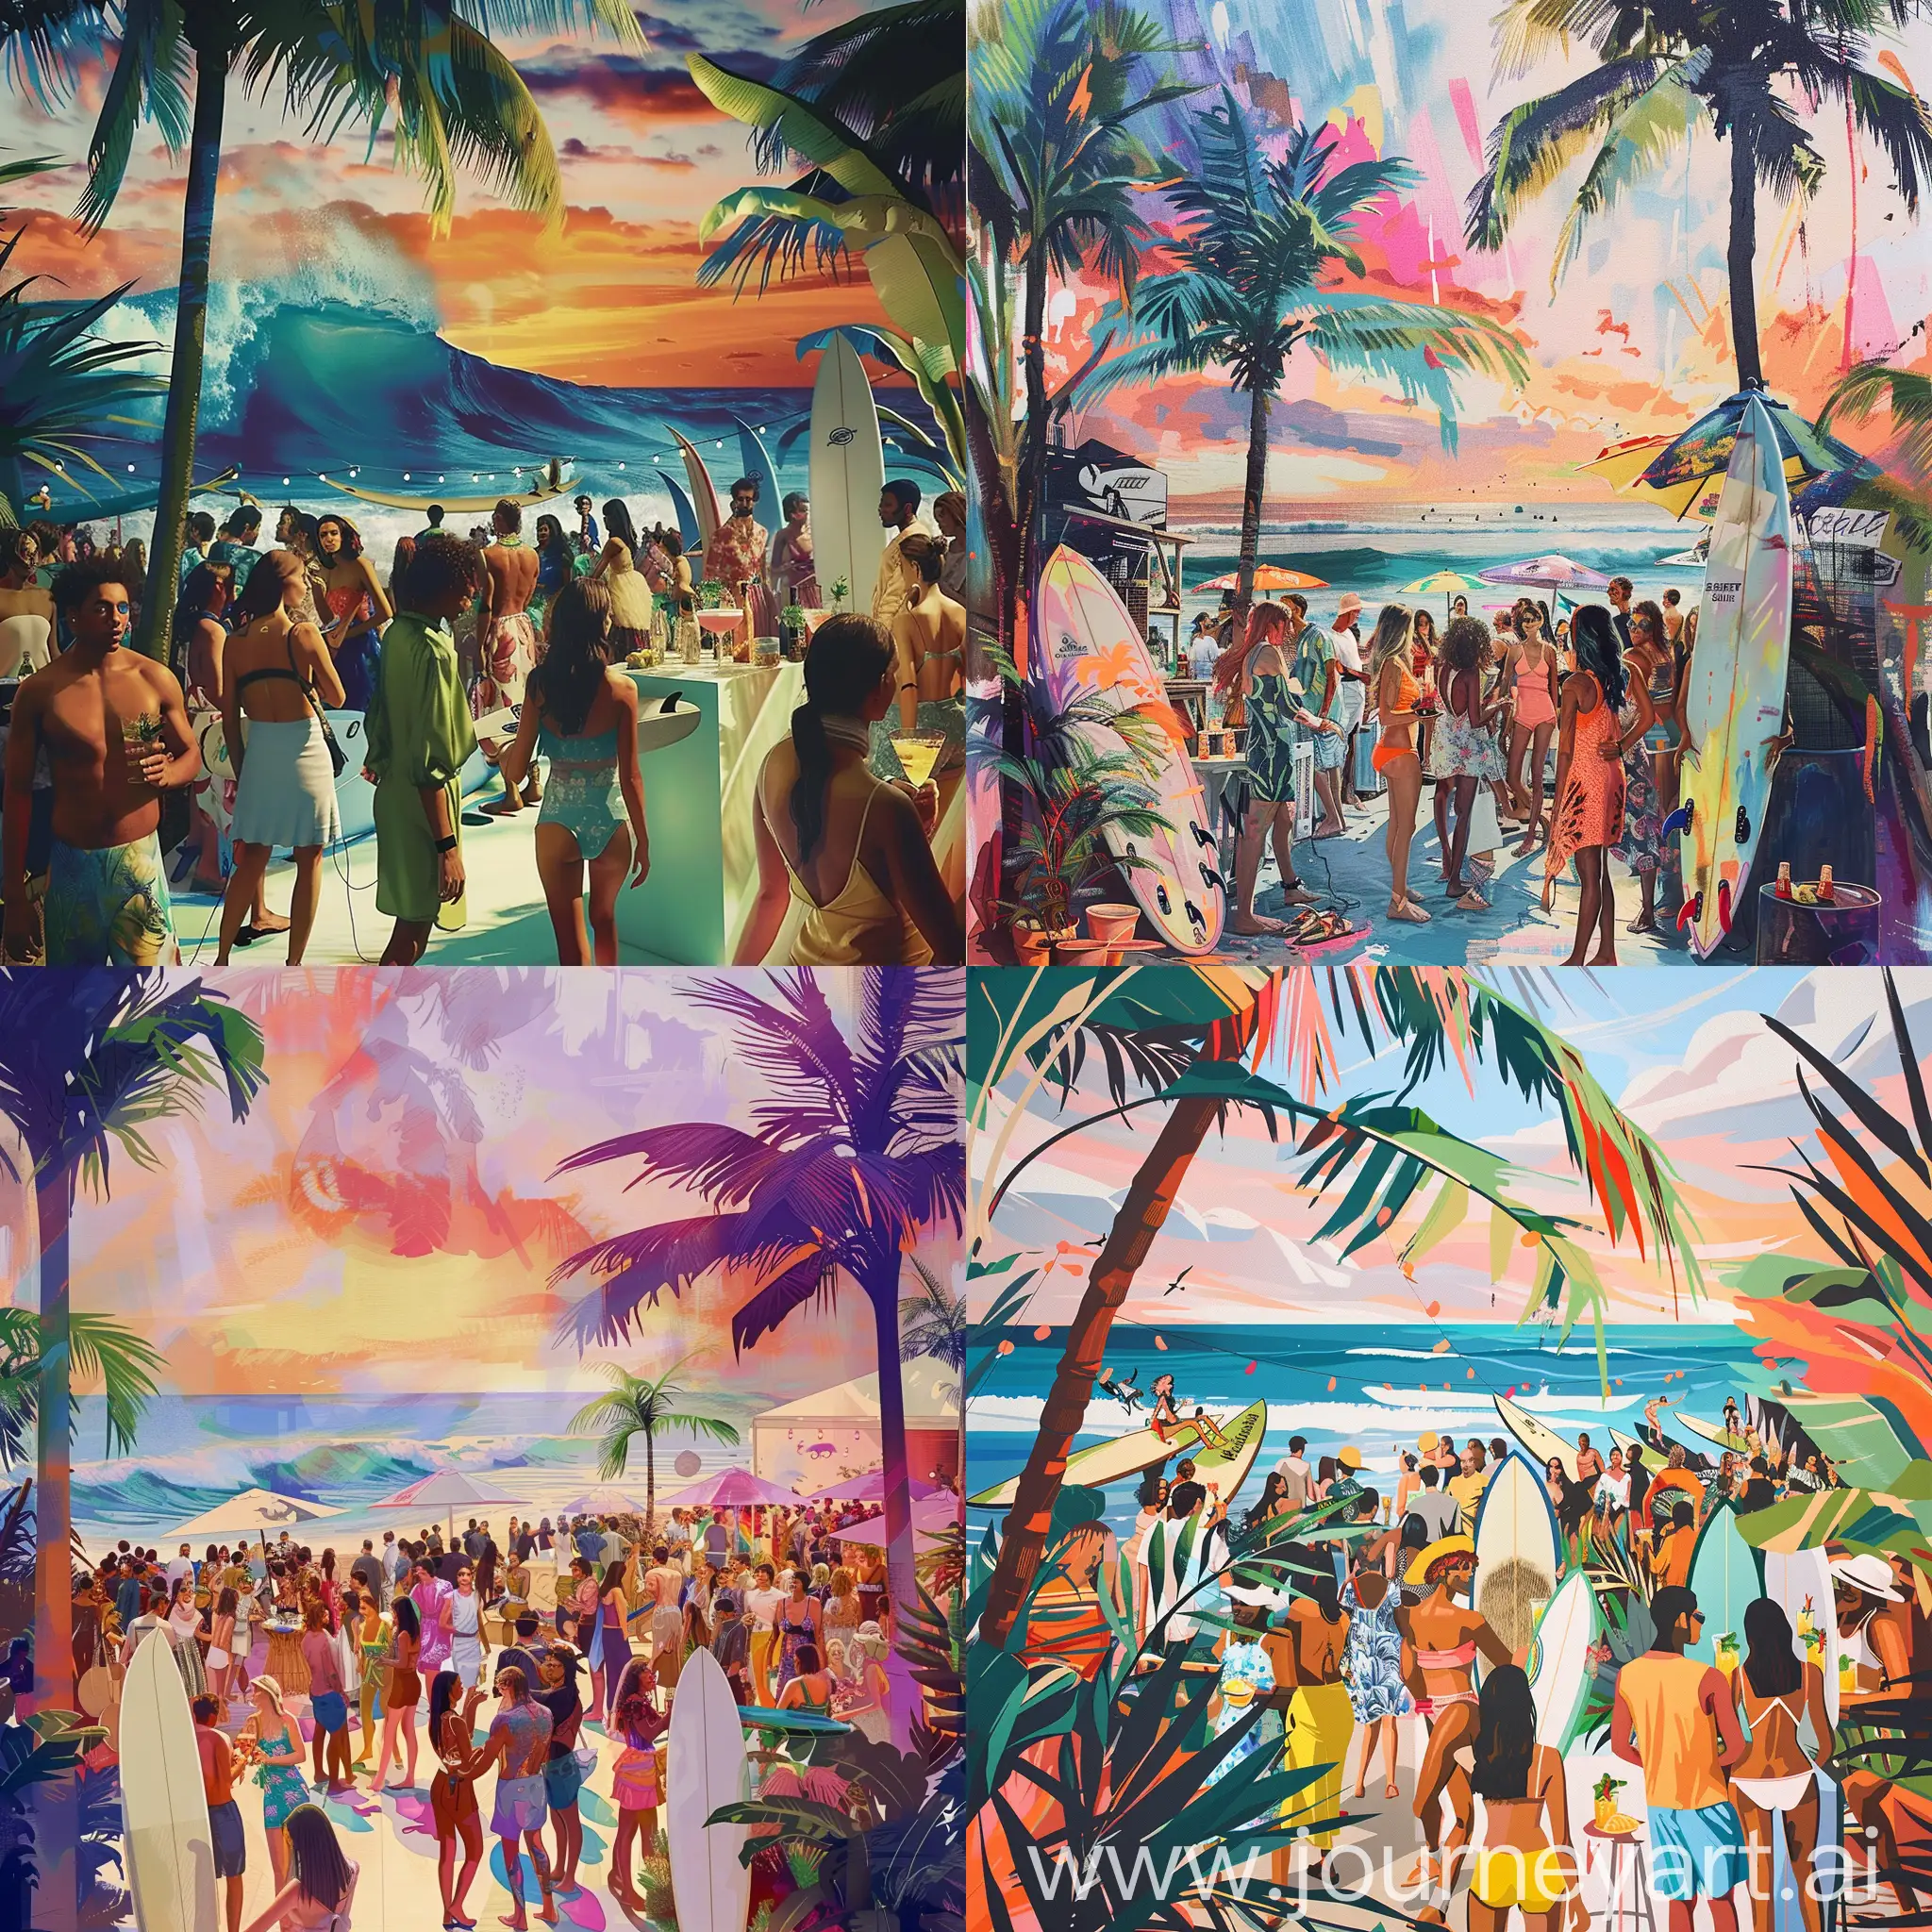 Generate an image capturing the vibrant atmosphere of a 'Surfer Night Launch Party' at the Reformation pop-up in Selfridges. Include elements such as surfboards, palm trees, beach-inspired decor, and a lively crowd enjoying tropical cocktails and live music. The scene should evoke the laid-back ambiance of a Miami beach party, with guests dressed in stylish beachwear and enjoying the festivities against a backdrop of ocean waves and sunset hues